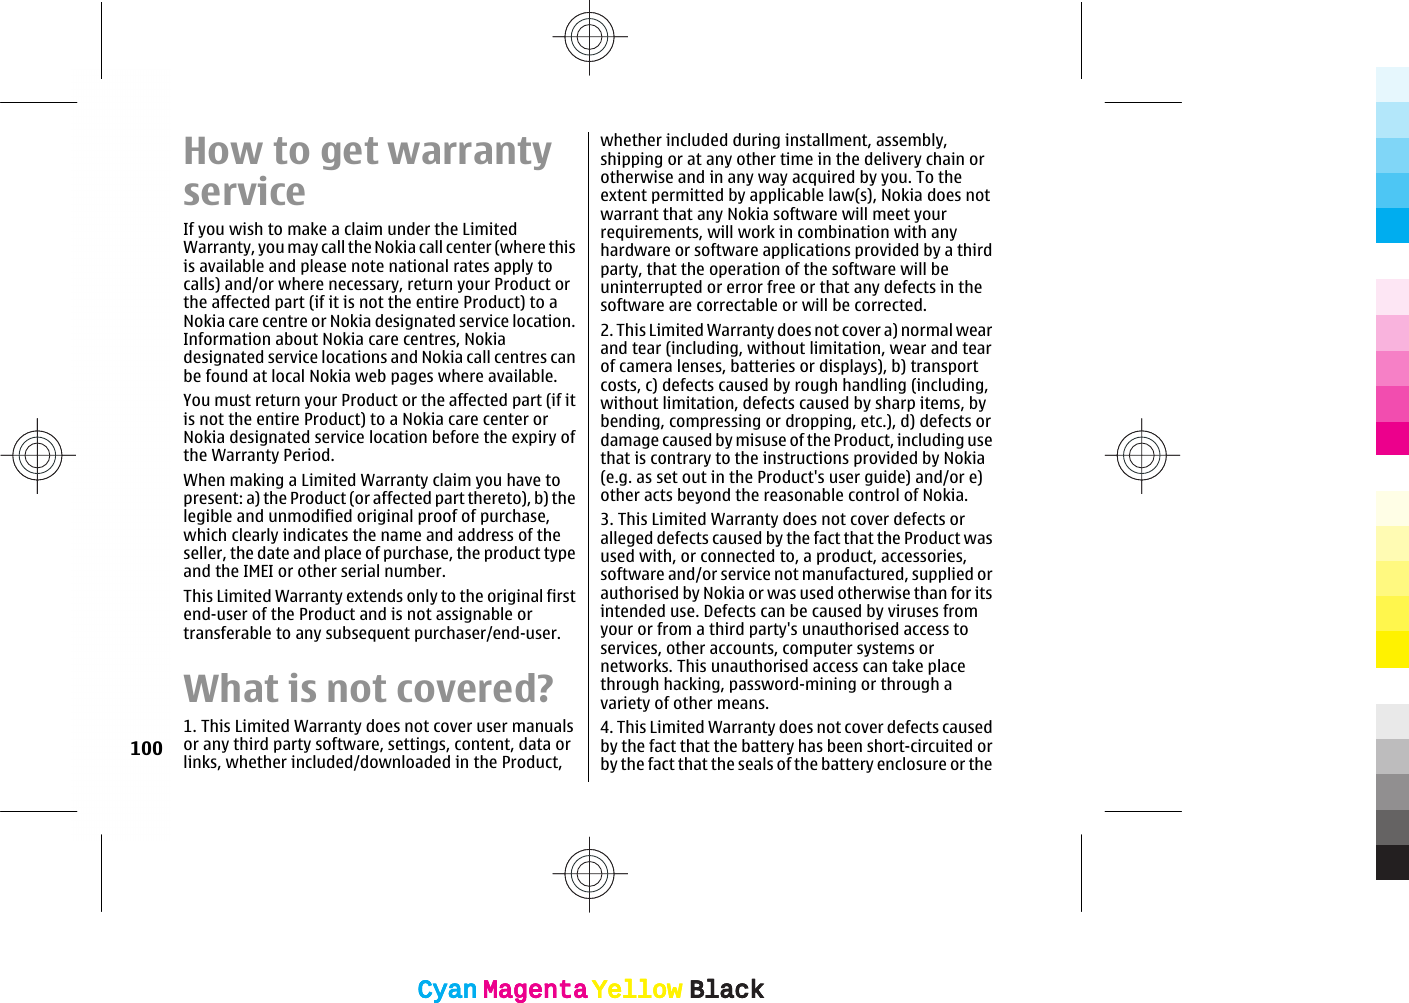 How to get warrantyserviceIf you wish to make a claim under the LimitedWarranty, you may call the Nokia call center (where thisis available and please note national rates apply tocalls) and/or where necessary, return your Product orthe affected part (if it is not the entire Product) to aNokia care centre or Nokia designated service location.Information about Nokia care centres, Nokiadesignated service locations and Nokia call centres canbe found at local Nokia web pages where available.You must return your Product or the affected part (if itis not the entire Product) to a Nokia care center orNokia designated service location before the expiry ofthe Warranty Period.When making a Limited Warranty claim you have topresent: a) the Product (or affected part thereto), b) thelegible and unmodified original proof of purchase,which clearly indicates the name and address of theseller, the date and place of purchase, the product typeand the IMEI or other serial number.This Limited Warranty extends only to the original firstend-user of the Product and is not assignable ortransferable to any subsequent purchaser/end-user.What is not covered?1. This Limited Warranty does not cover user manualsor any third party software, settings, content, data orlinks, whether included/downloaded in the Product,whether included during installment, assembly,shipping or at any other time in the delivery chain orotherwise and in any way acquired by you. To theextent permitted by applicable law(s), Nokia does notwarrant that any Nokia software will meet yourrequirements, will work in combination with anyhardware or software applications provided by a thirdparty, that the operation of the software will beuninterrupted or error free or that any defects in thesoftware are correctable or will be corrected.2. This Limited Warranty does not cover a) normal wearand tear (including, without limitation, wear and tearof camera lenses, batteries or displays), b) transportcosts, c) defects caused by rough handling (including,without limitation, defects caused by sharp items, bybending, compressing or dropping, etc.), d) defects ordamage caused by misuse of the Product, including usethat is contrary to the instructions provided by Nokia(e.g. as set out in the Product&apos;s user guide) and/or e)other acts beyond the reasonable control of Nokia.3. This Limited Warranty does not cover defects oralleged defects caused by the fact that the Product wasused with, or connected to, a product, accessories,software and/or service not manufactured, supplied orauthorised by Nokia or was used otherwise than for itsintended use. Defects can be caused by viruses fromyour or from a third party&apos;s unauthorised access toservices, other accounts, computer systems ornetworks. This unauthorised access can take placethrough hacking, password-mining or through avariety of other means.4. This Limited Warranty does not cover defects causedby the fact that the battery has been short-circuited orby the fact that the seals of the battery enclosure or the100CyanCyanMagentaMagentaYellowYellowBlackBlackCyanCyanMagentaMagentaYellowYellowBlackBlack